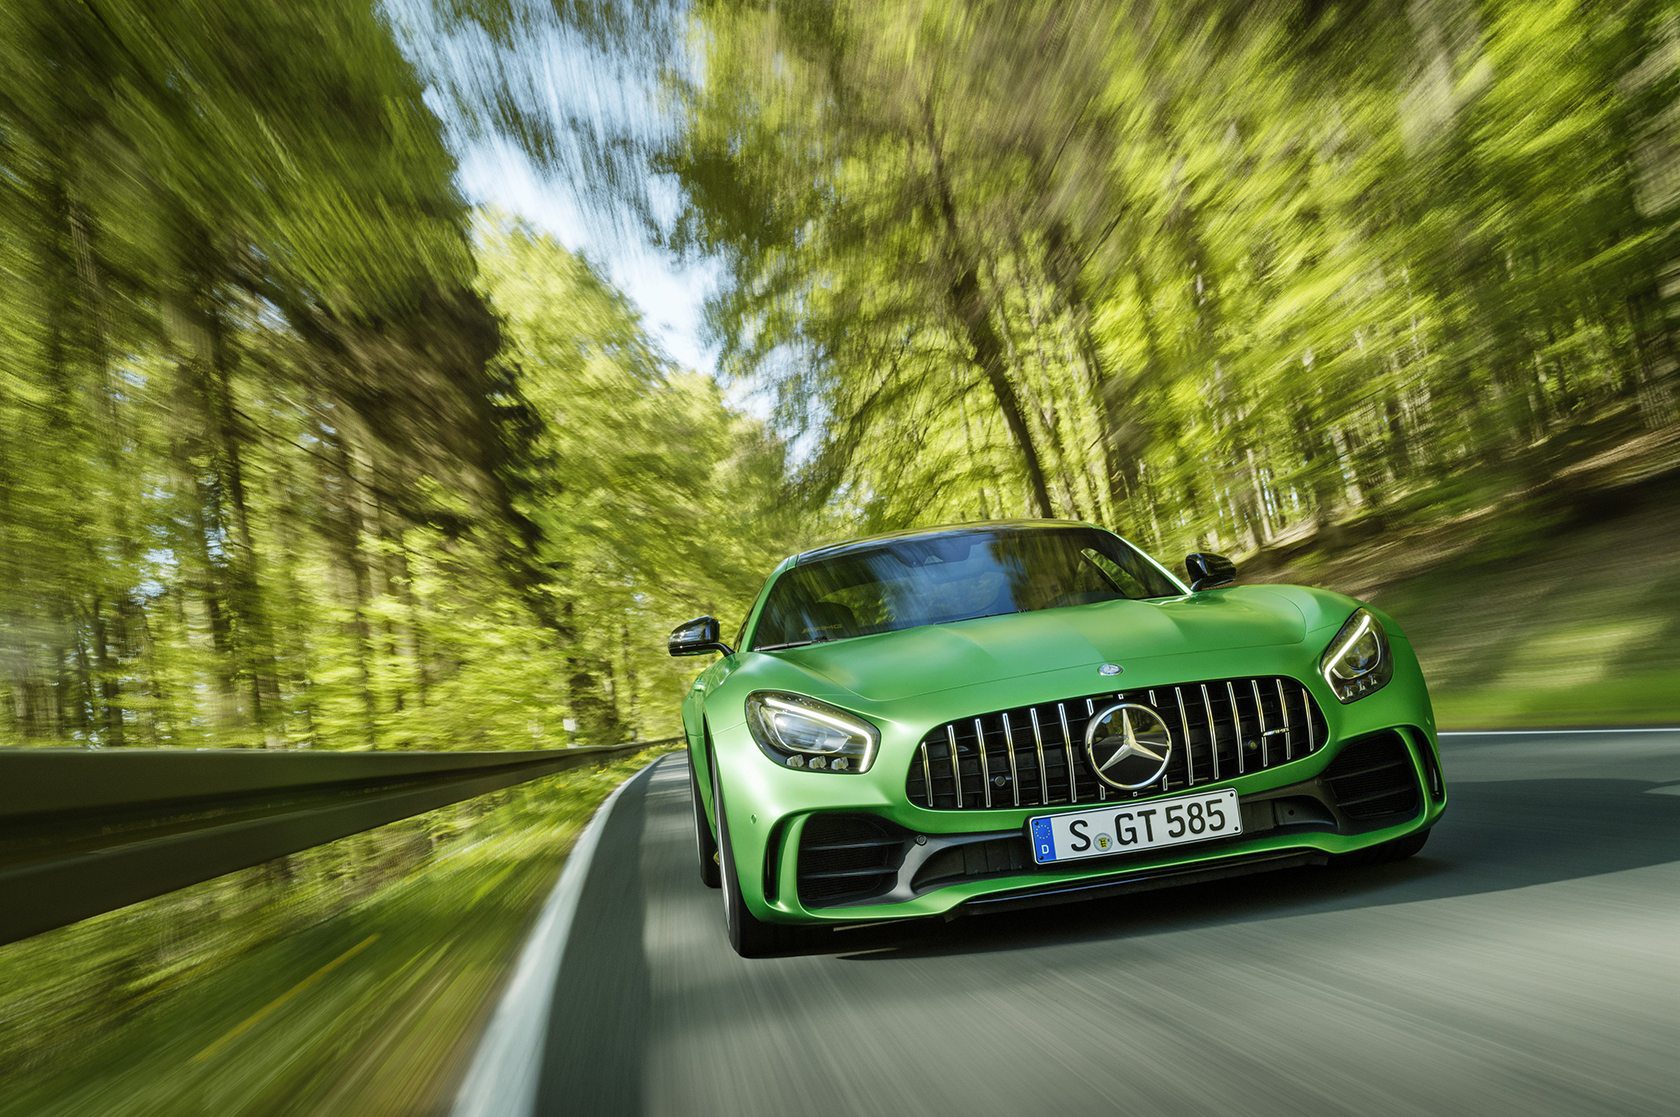 Mercedes-AMG GT R Sets A Record Nordschleife Lap Time